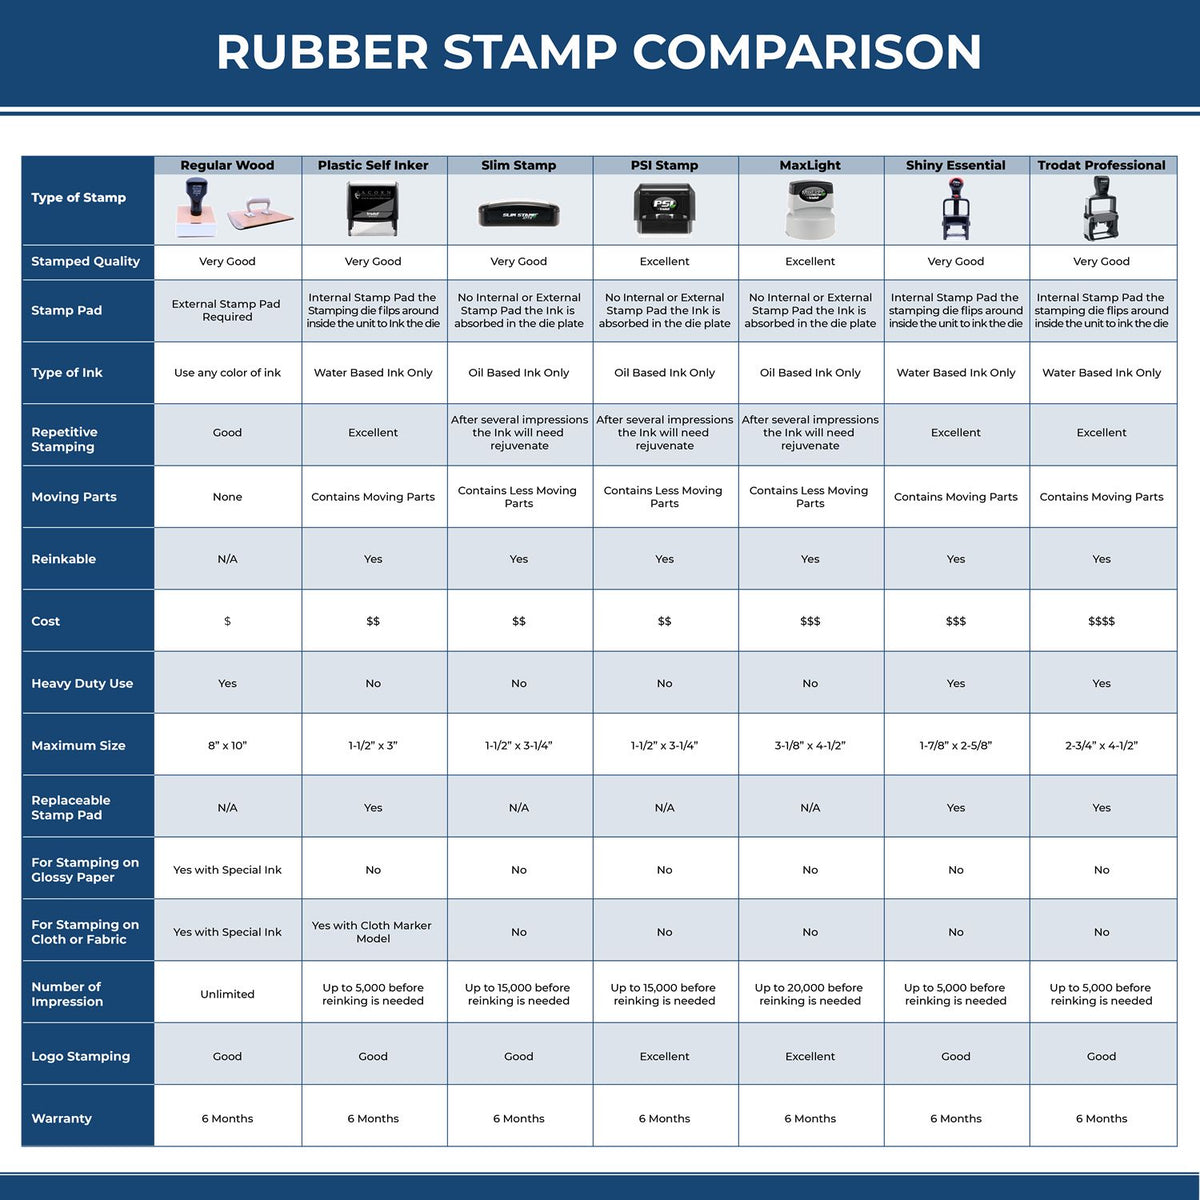 Large Self-Inking Unclaimed Stamp 5585S Rubber Stamp Comparison